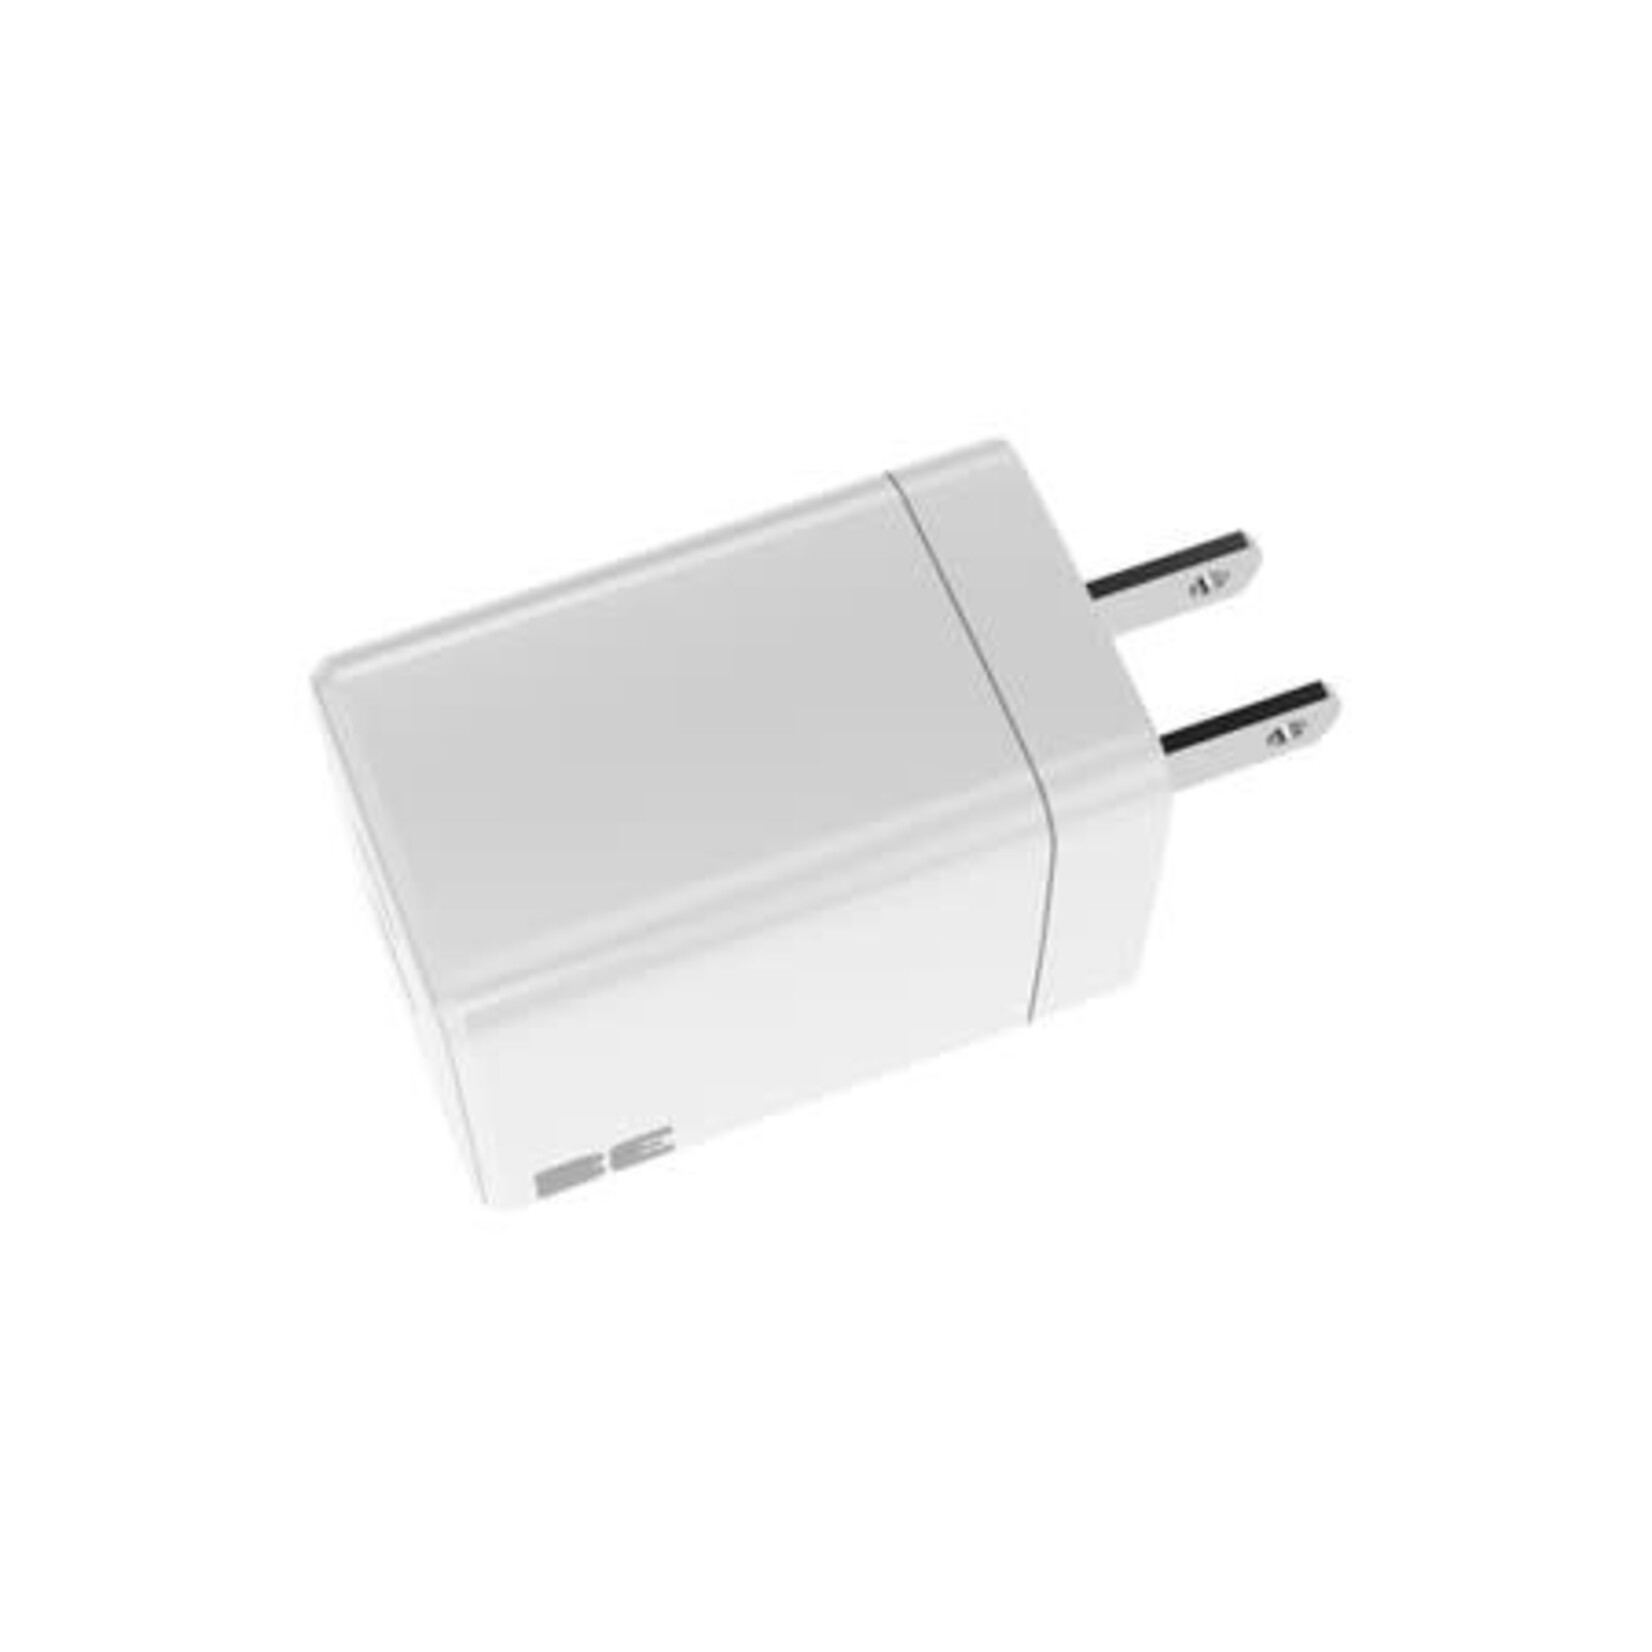 blu element Chargeur Mural Double USB-C 35W